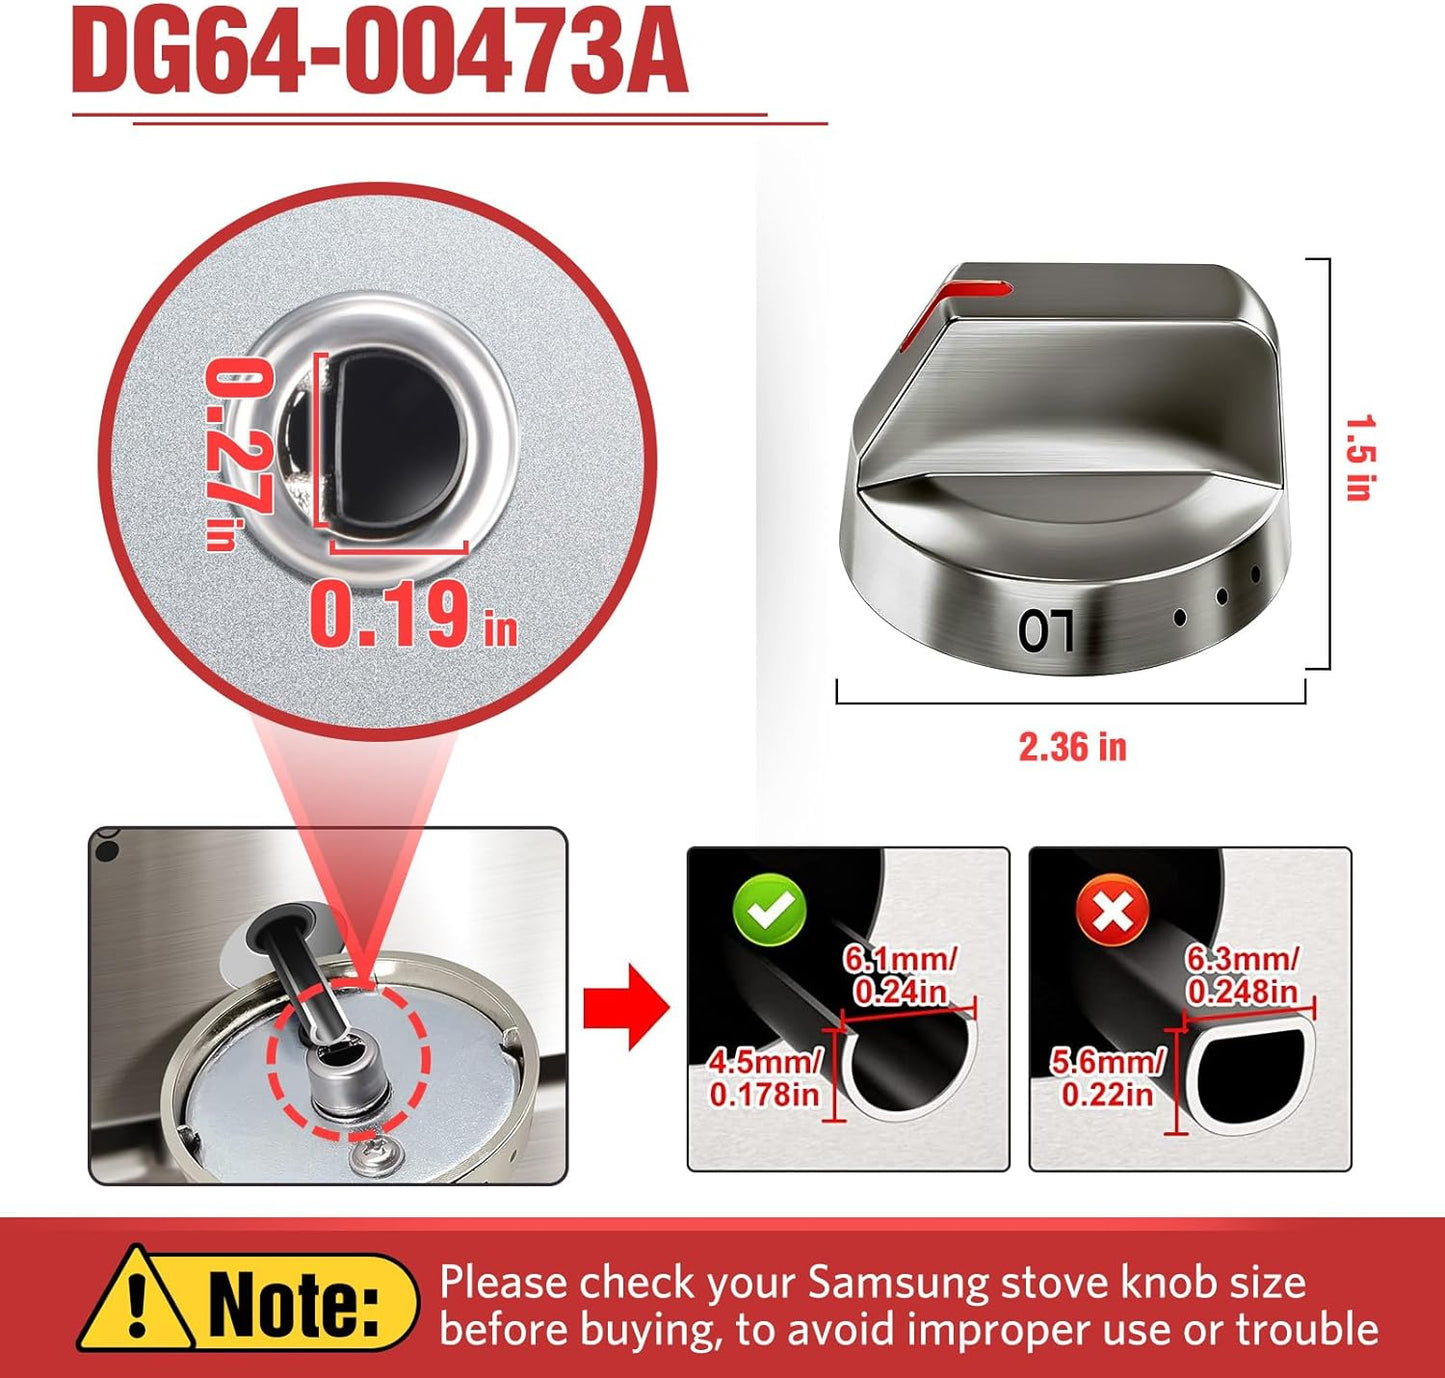 DG64-00473A Upgraded Stove Knob Baking Oven Knob Replacement Parts Compatible with Samsung Gas Stove Stove Parts NX58H5600SS NX58H5650WS NX58K7850SS - Top Burner Control Dial Knob Stainless Steel 5 Pieces ack ack